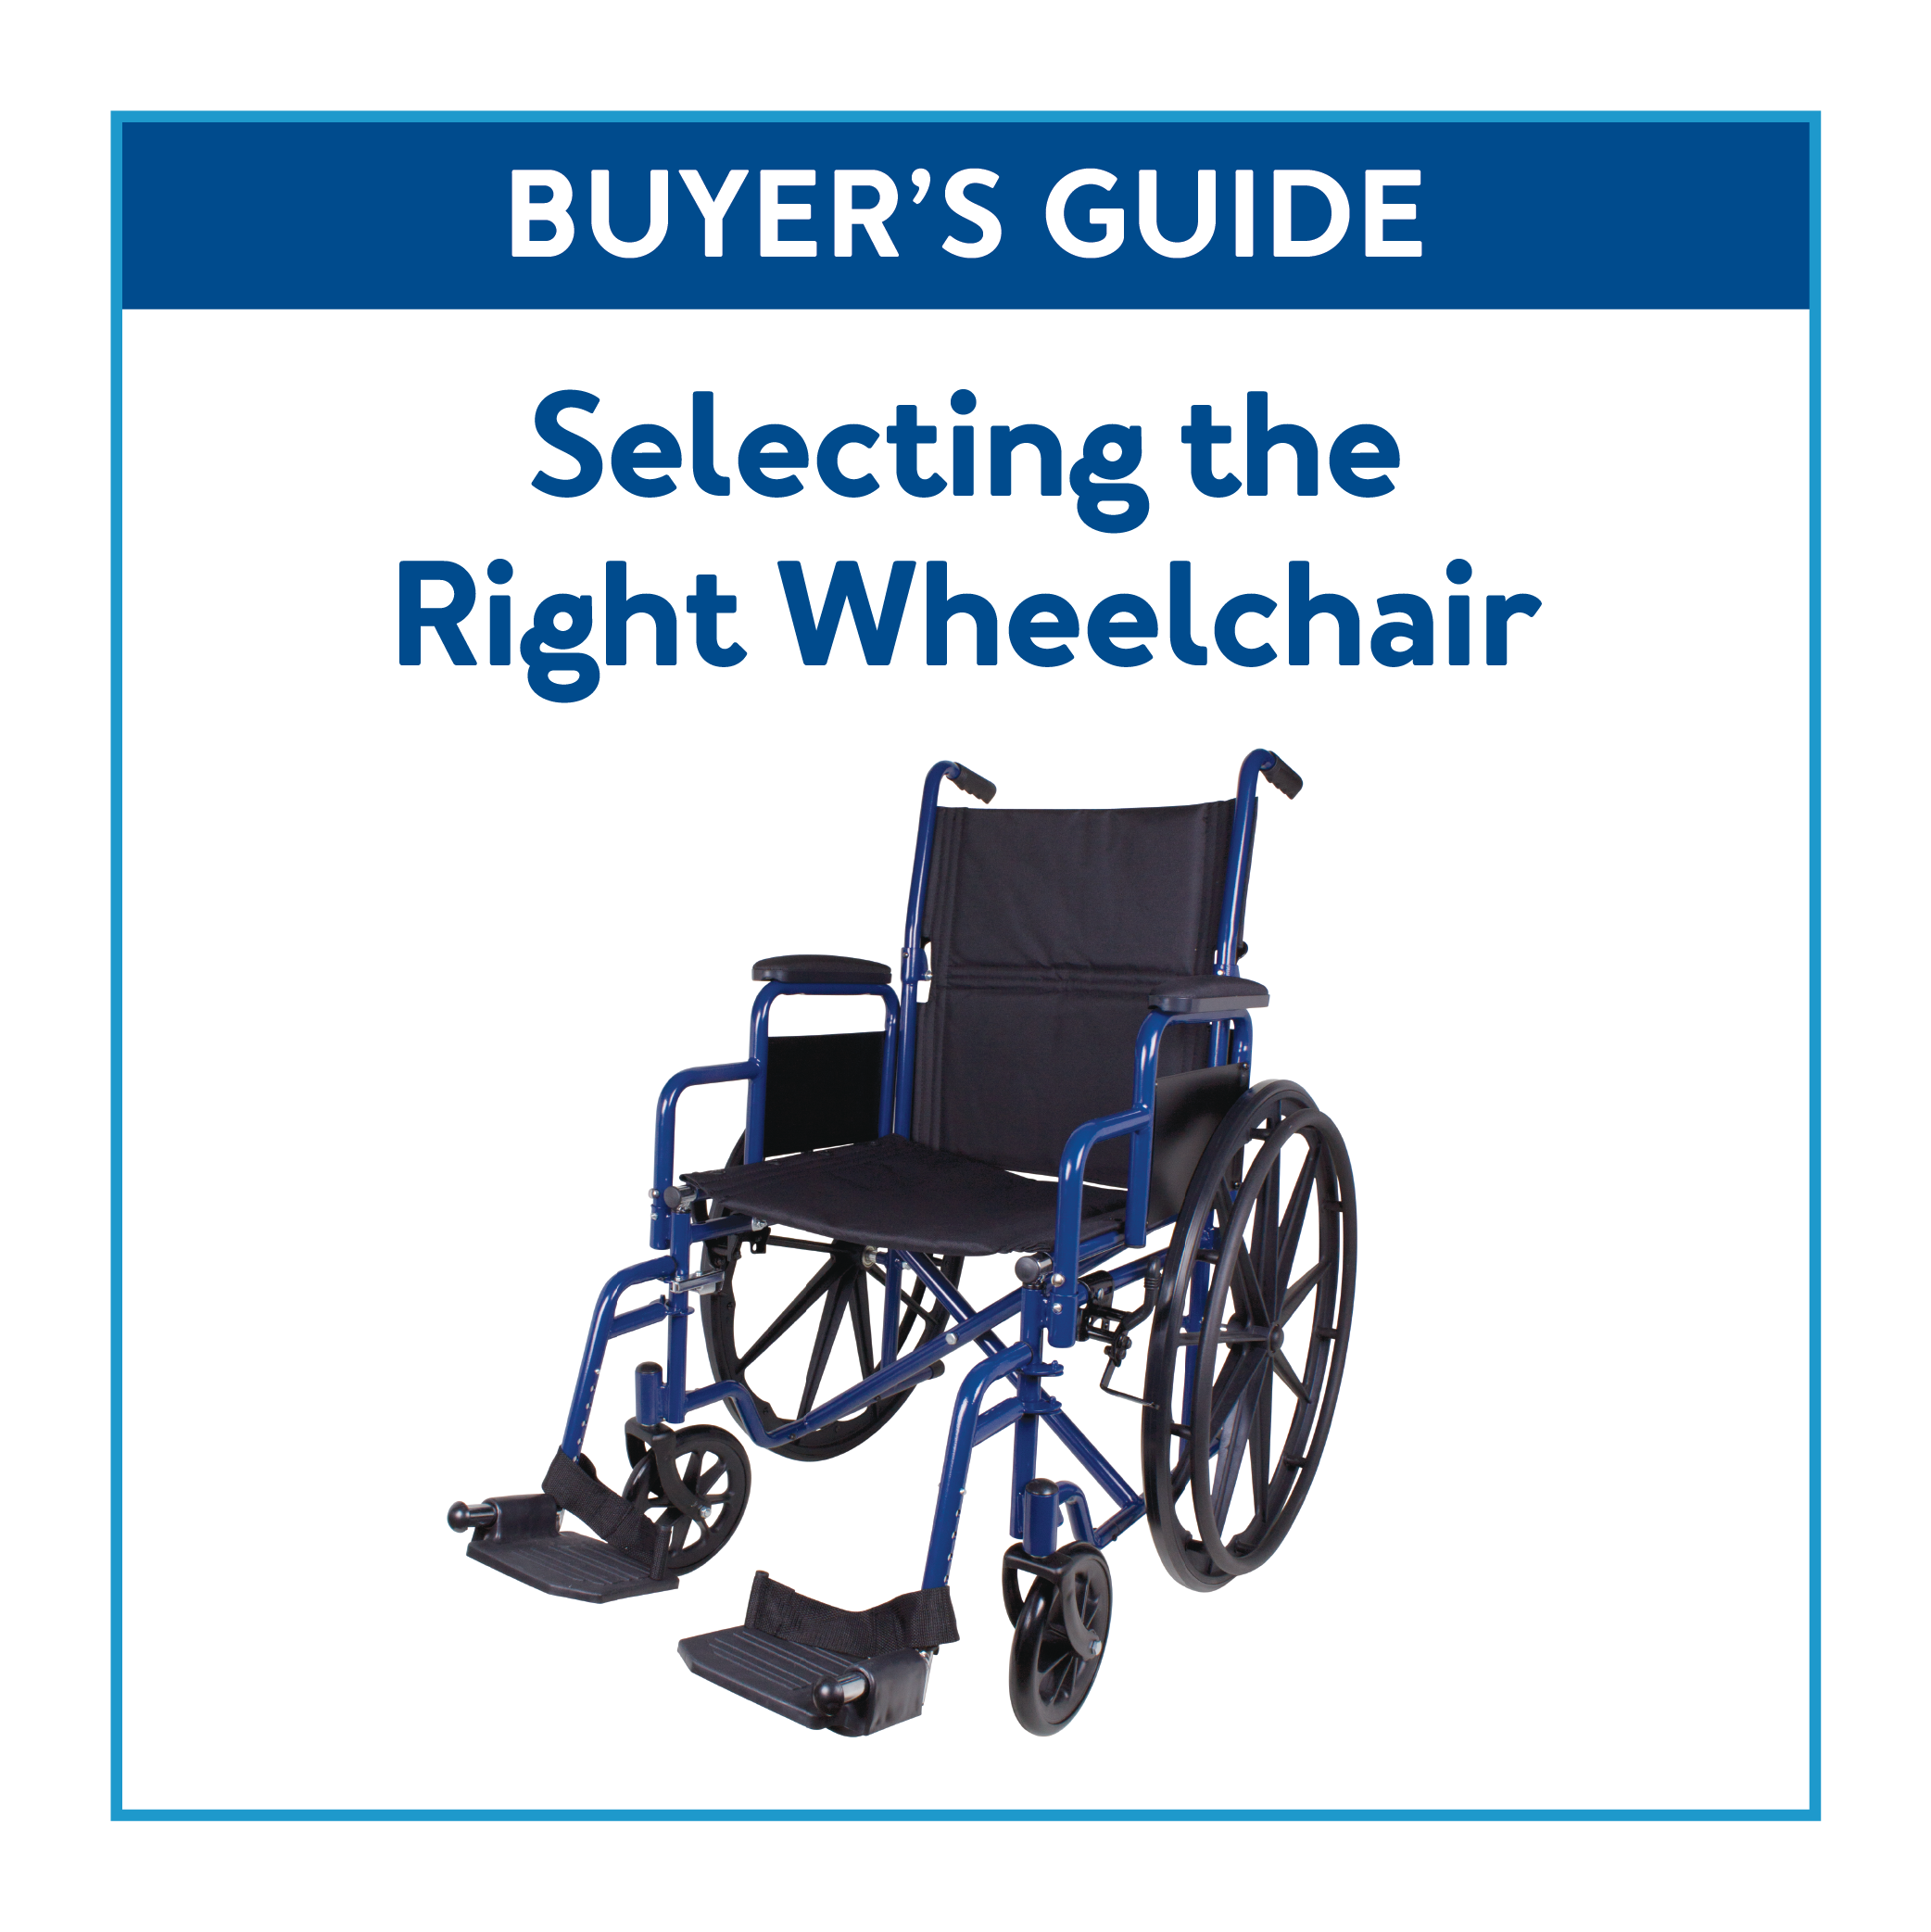 https://cdn.shopify.com/s/files/1/0240/6504/8681/t/34/assets/pf-f8292d44--BuyersGuideWheelchairsCover2.png?v=1585763642